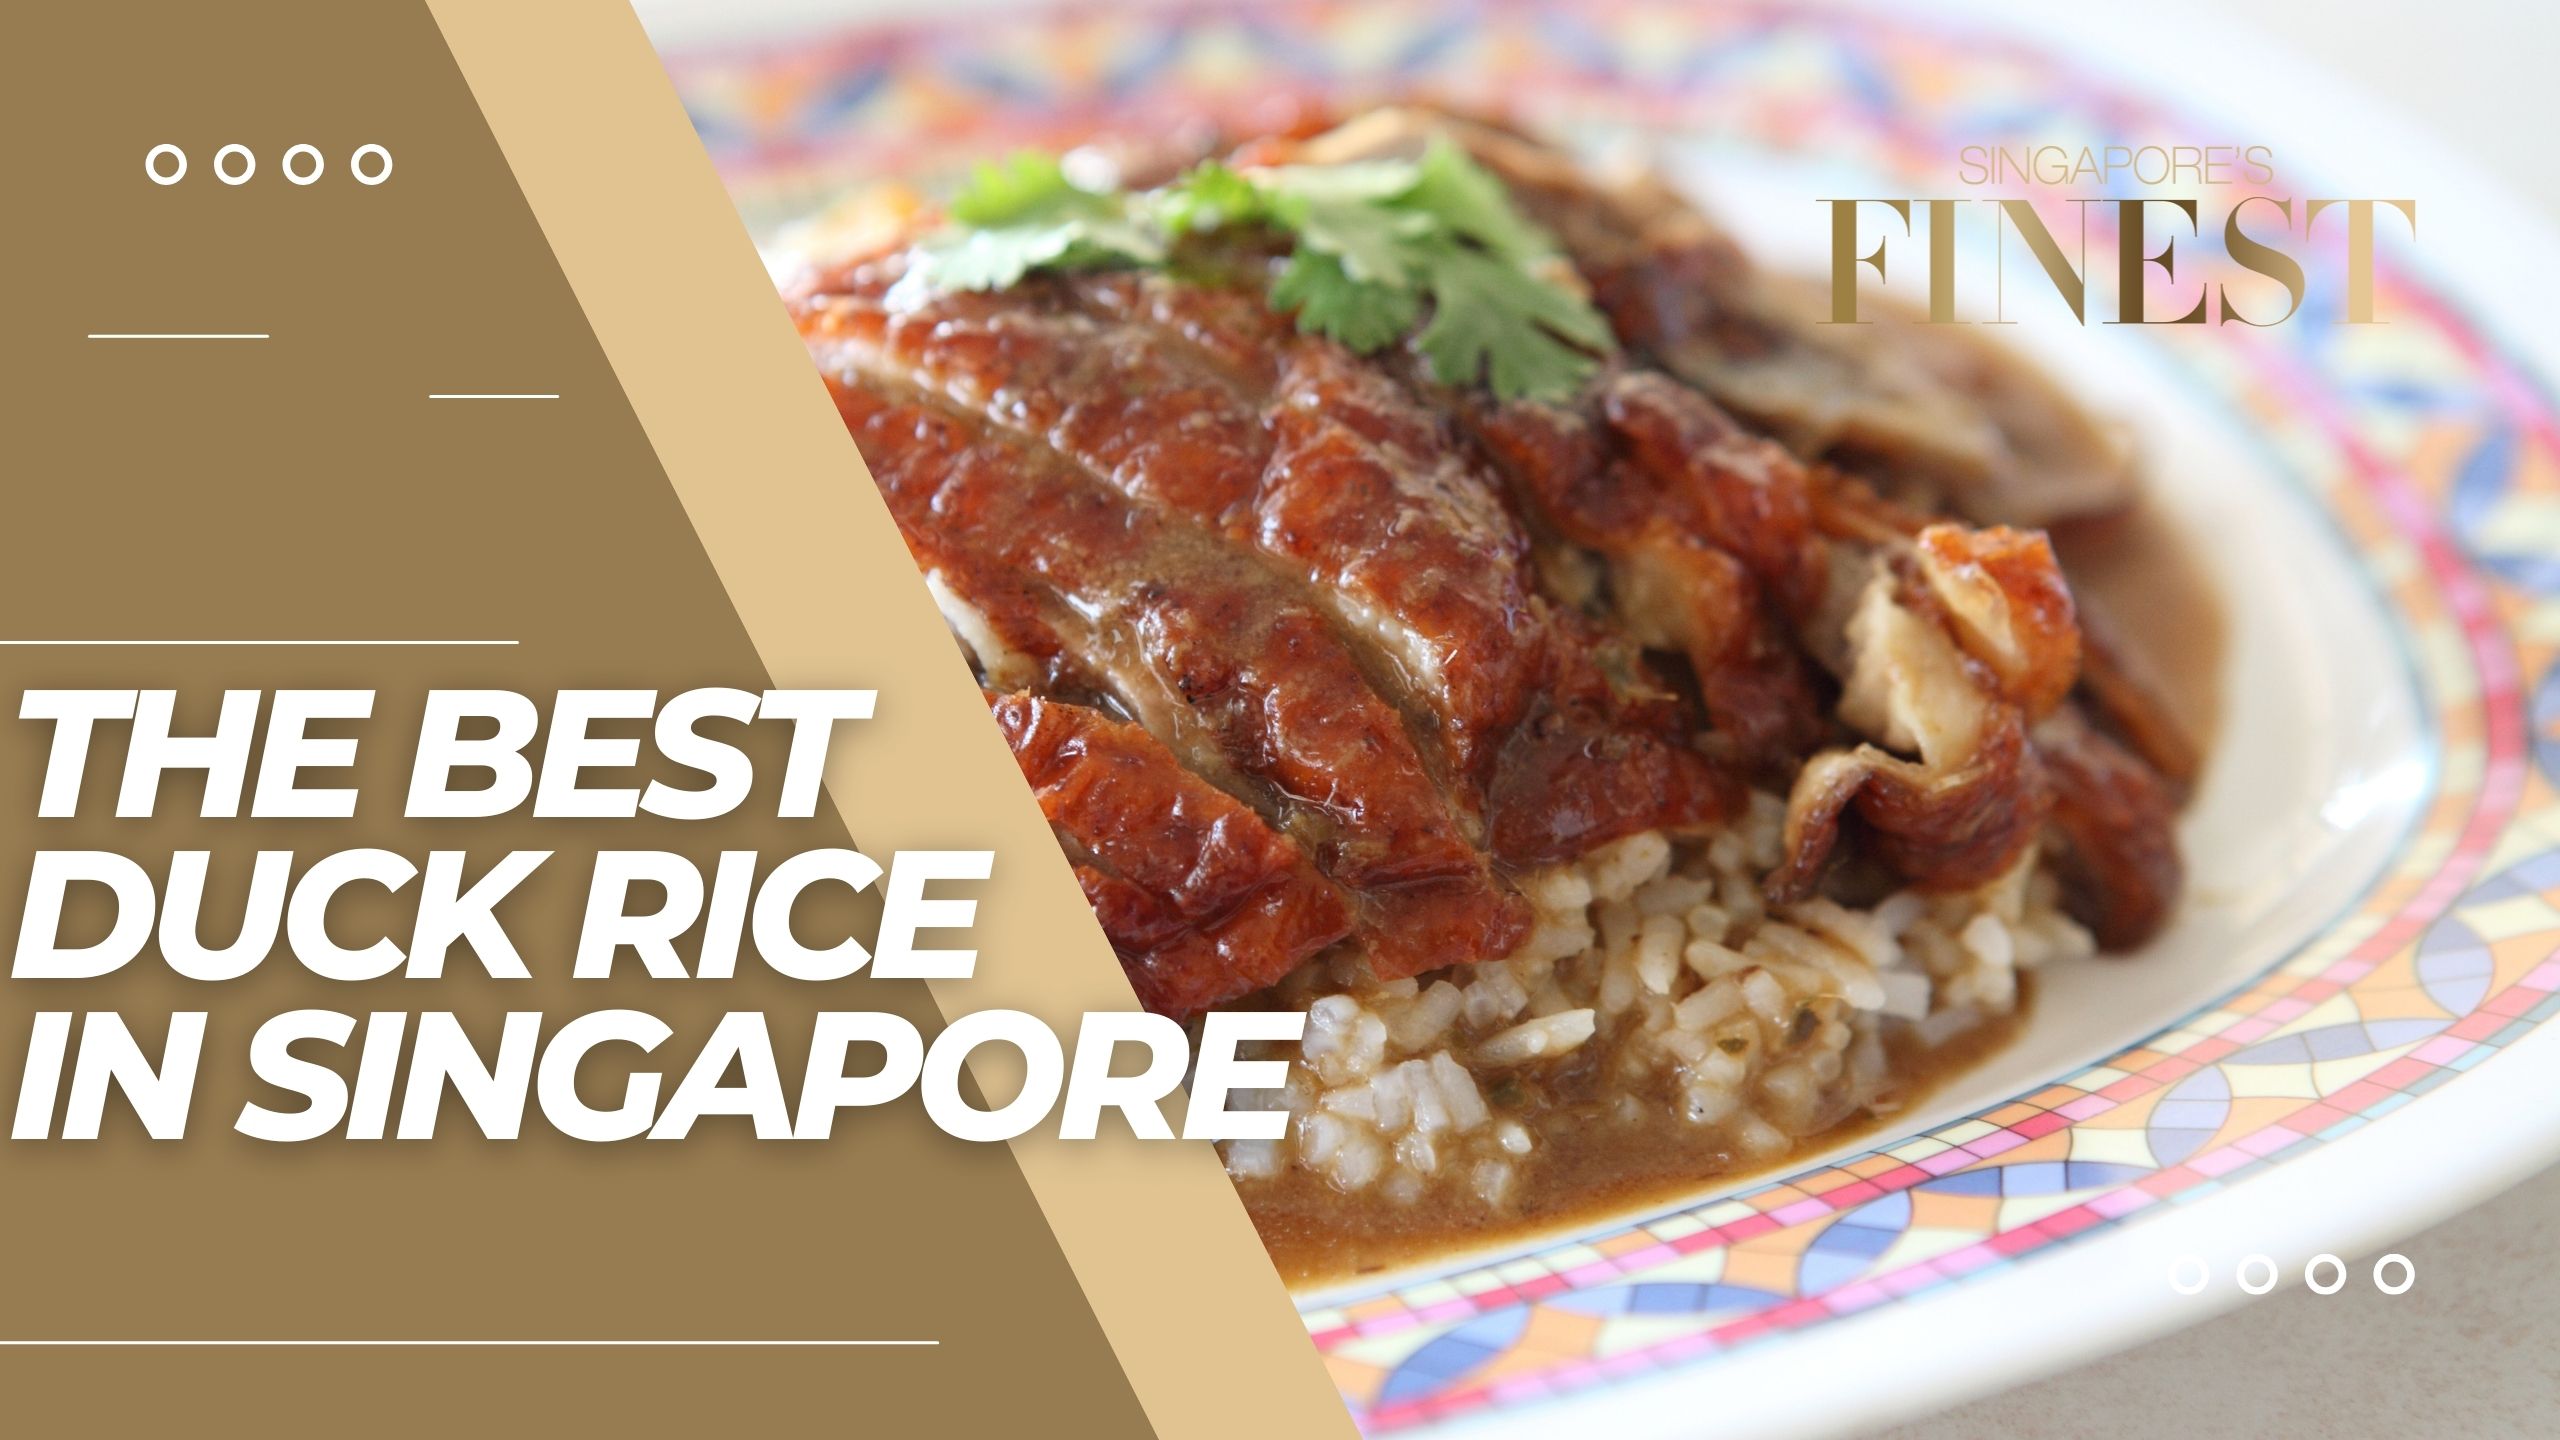 The Finest Braised Duck Rice in Singapore